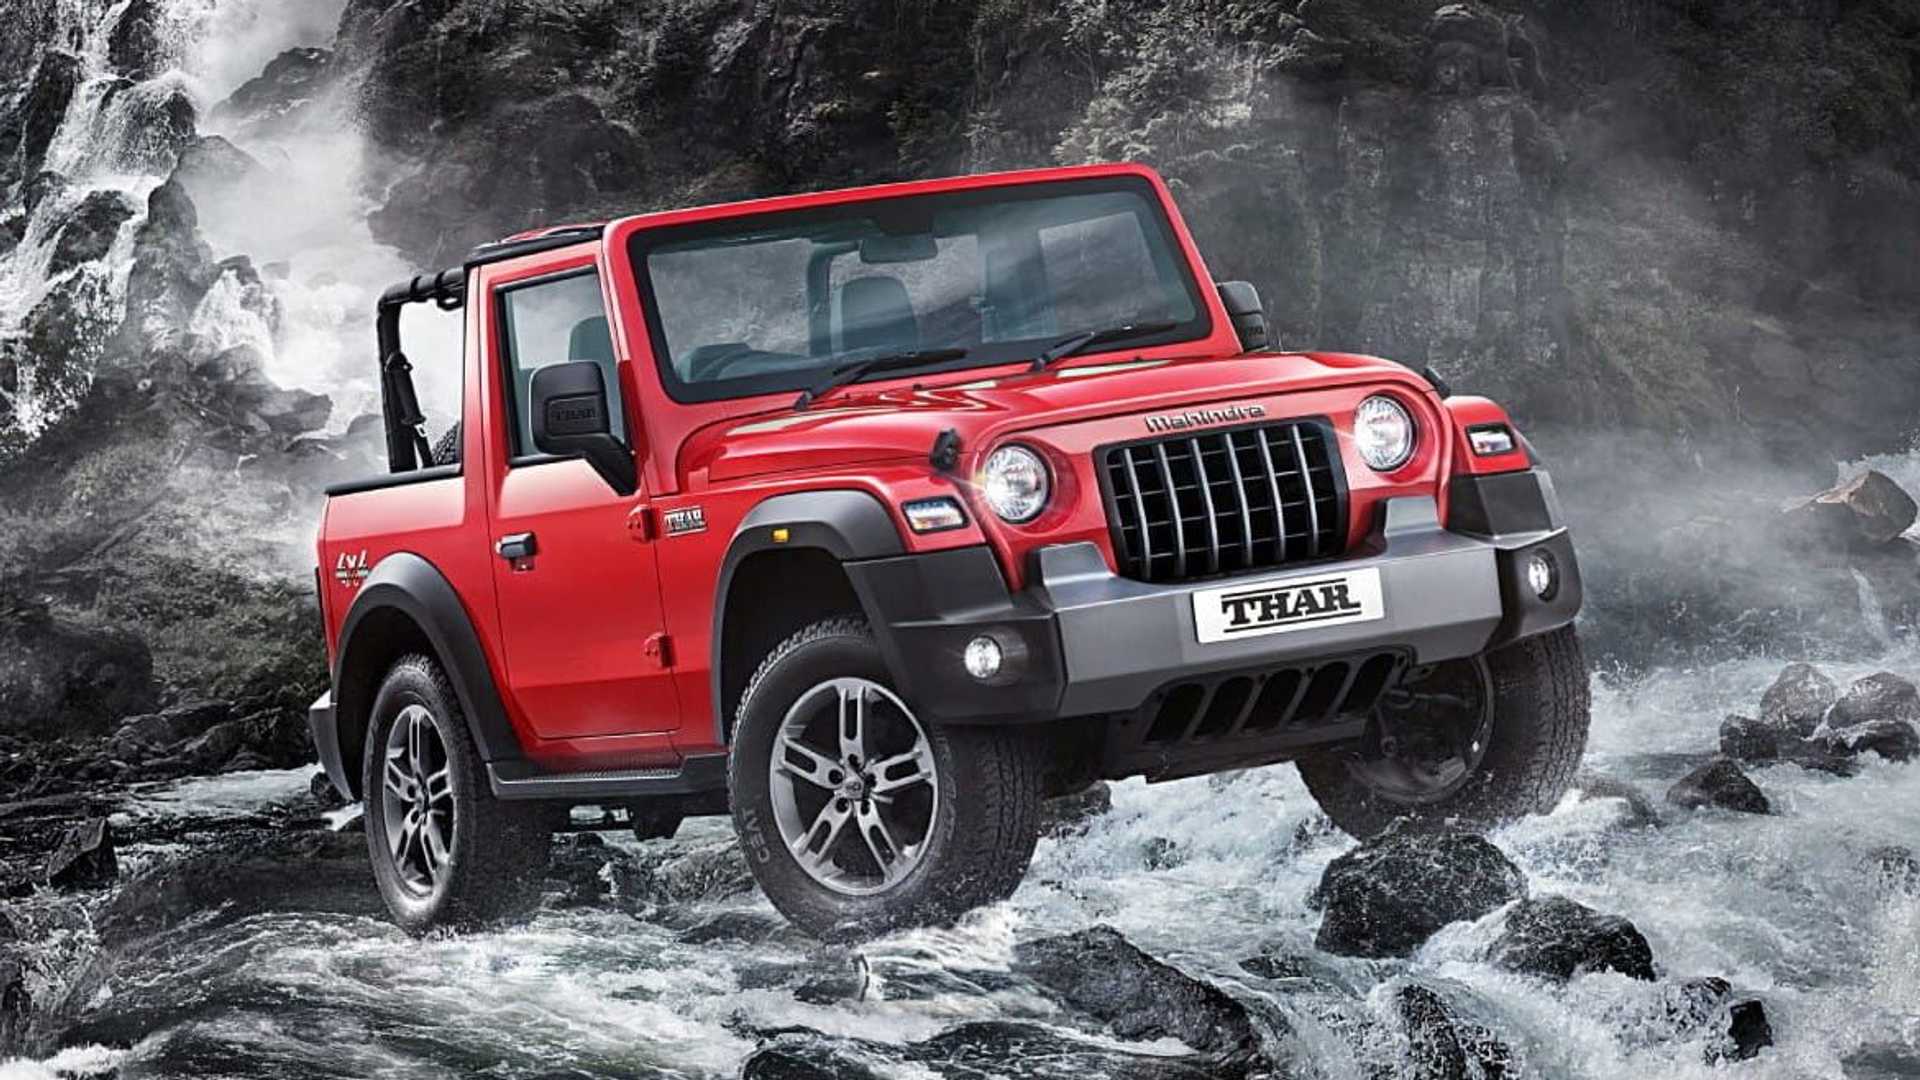 Get out of the Way Ford Bronco, Jeep's Wrangler Has Been Cloned as Mahindra Thar